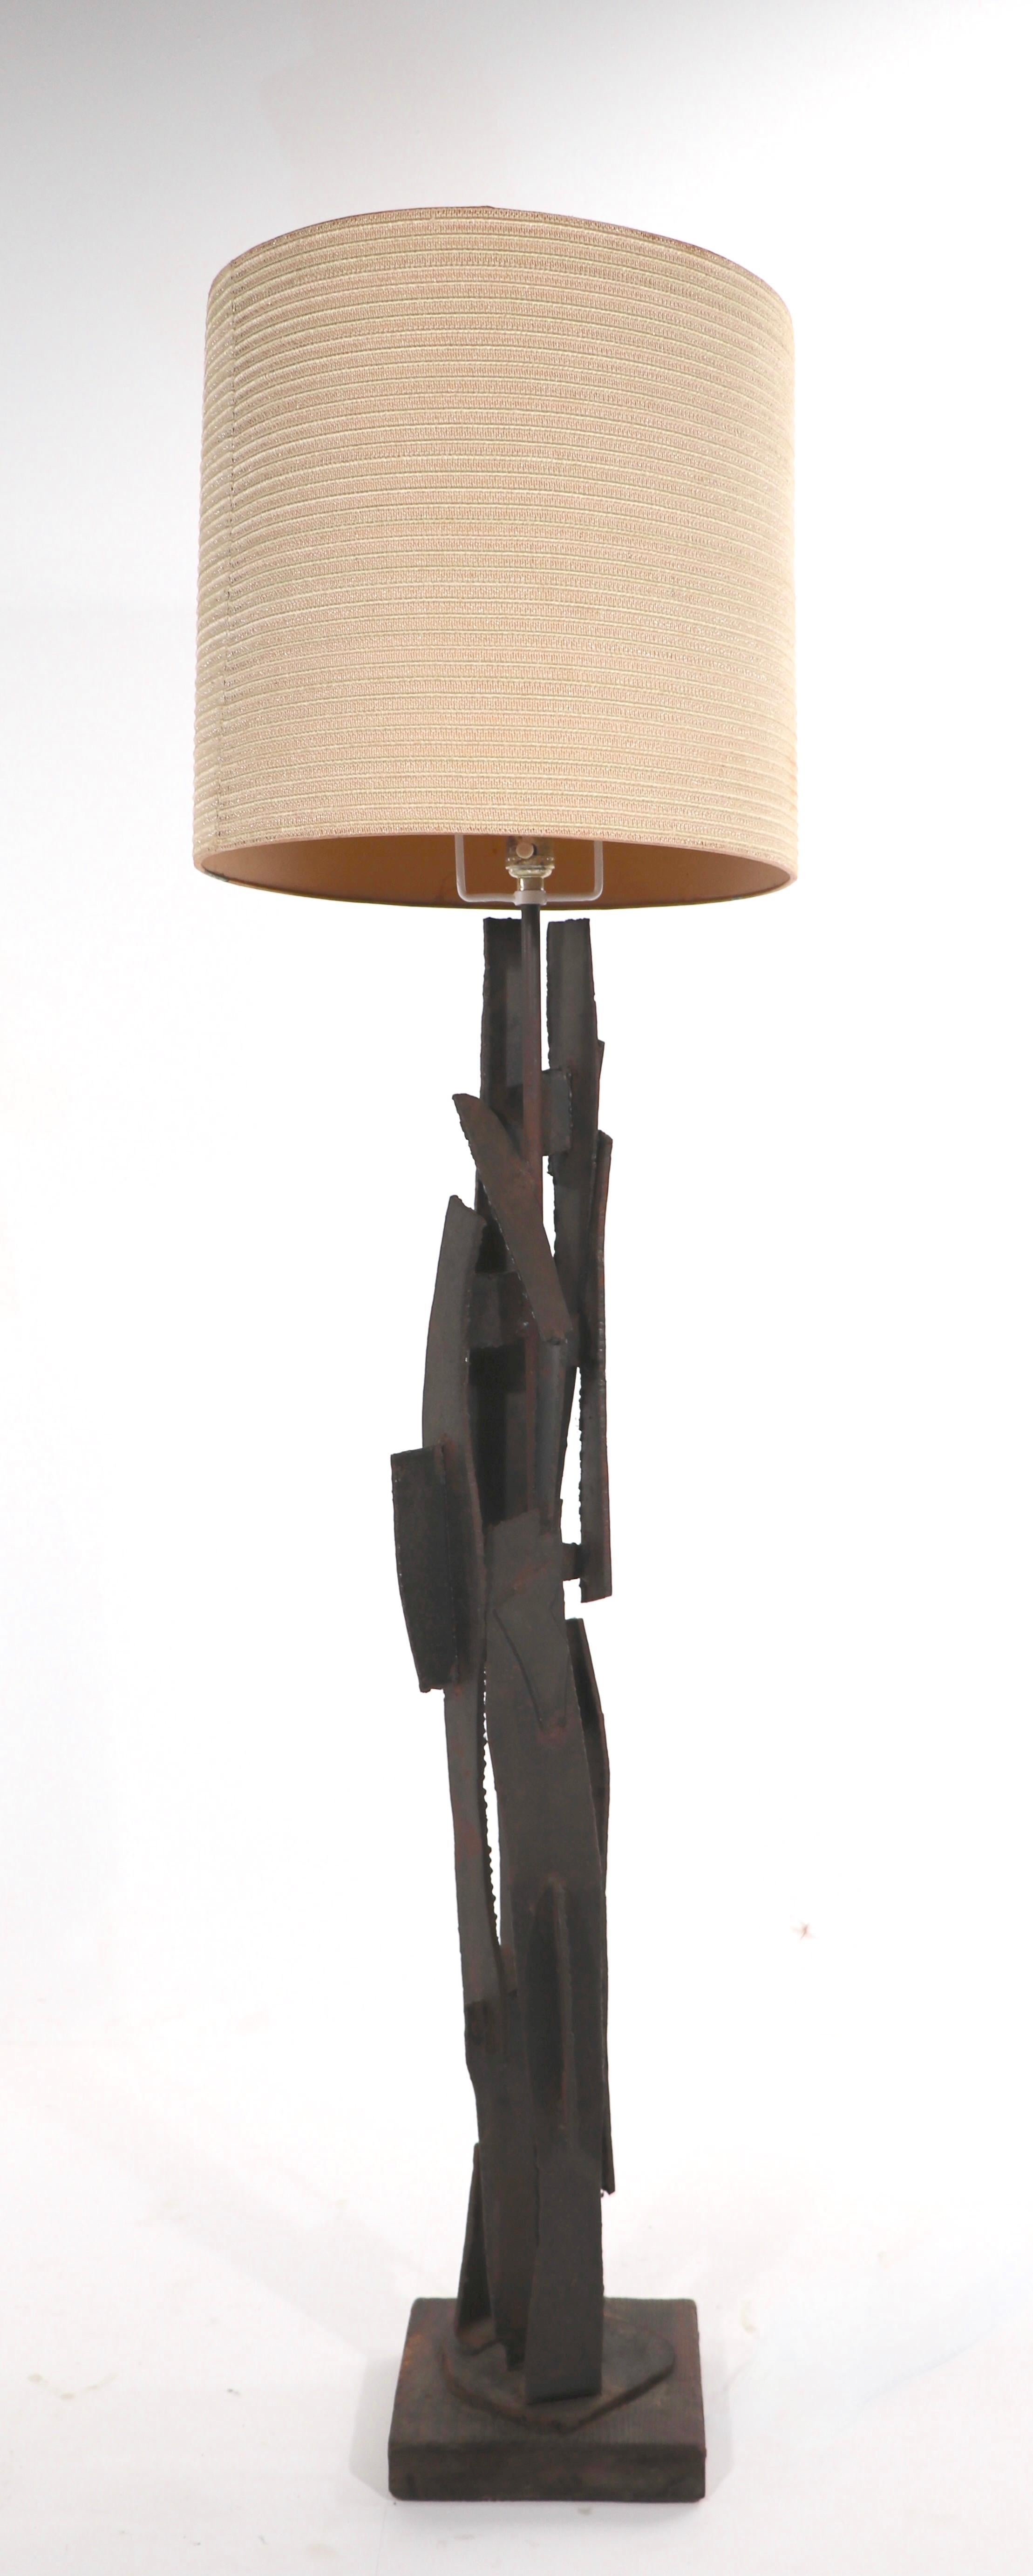 Rare floor lamp version of the iconic Brutalist lamp, designed by Harry Balmer for the Laurel Lamp company. The vertical standard is comprised of torch cut iron, welded together, mounted on a wrought cut wood base, with the classic squared laurel